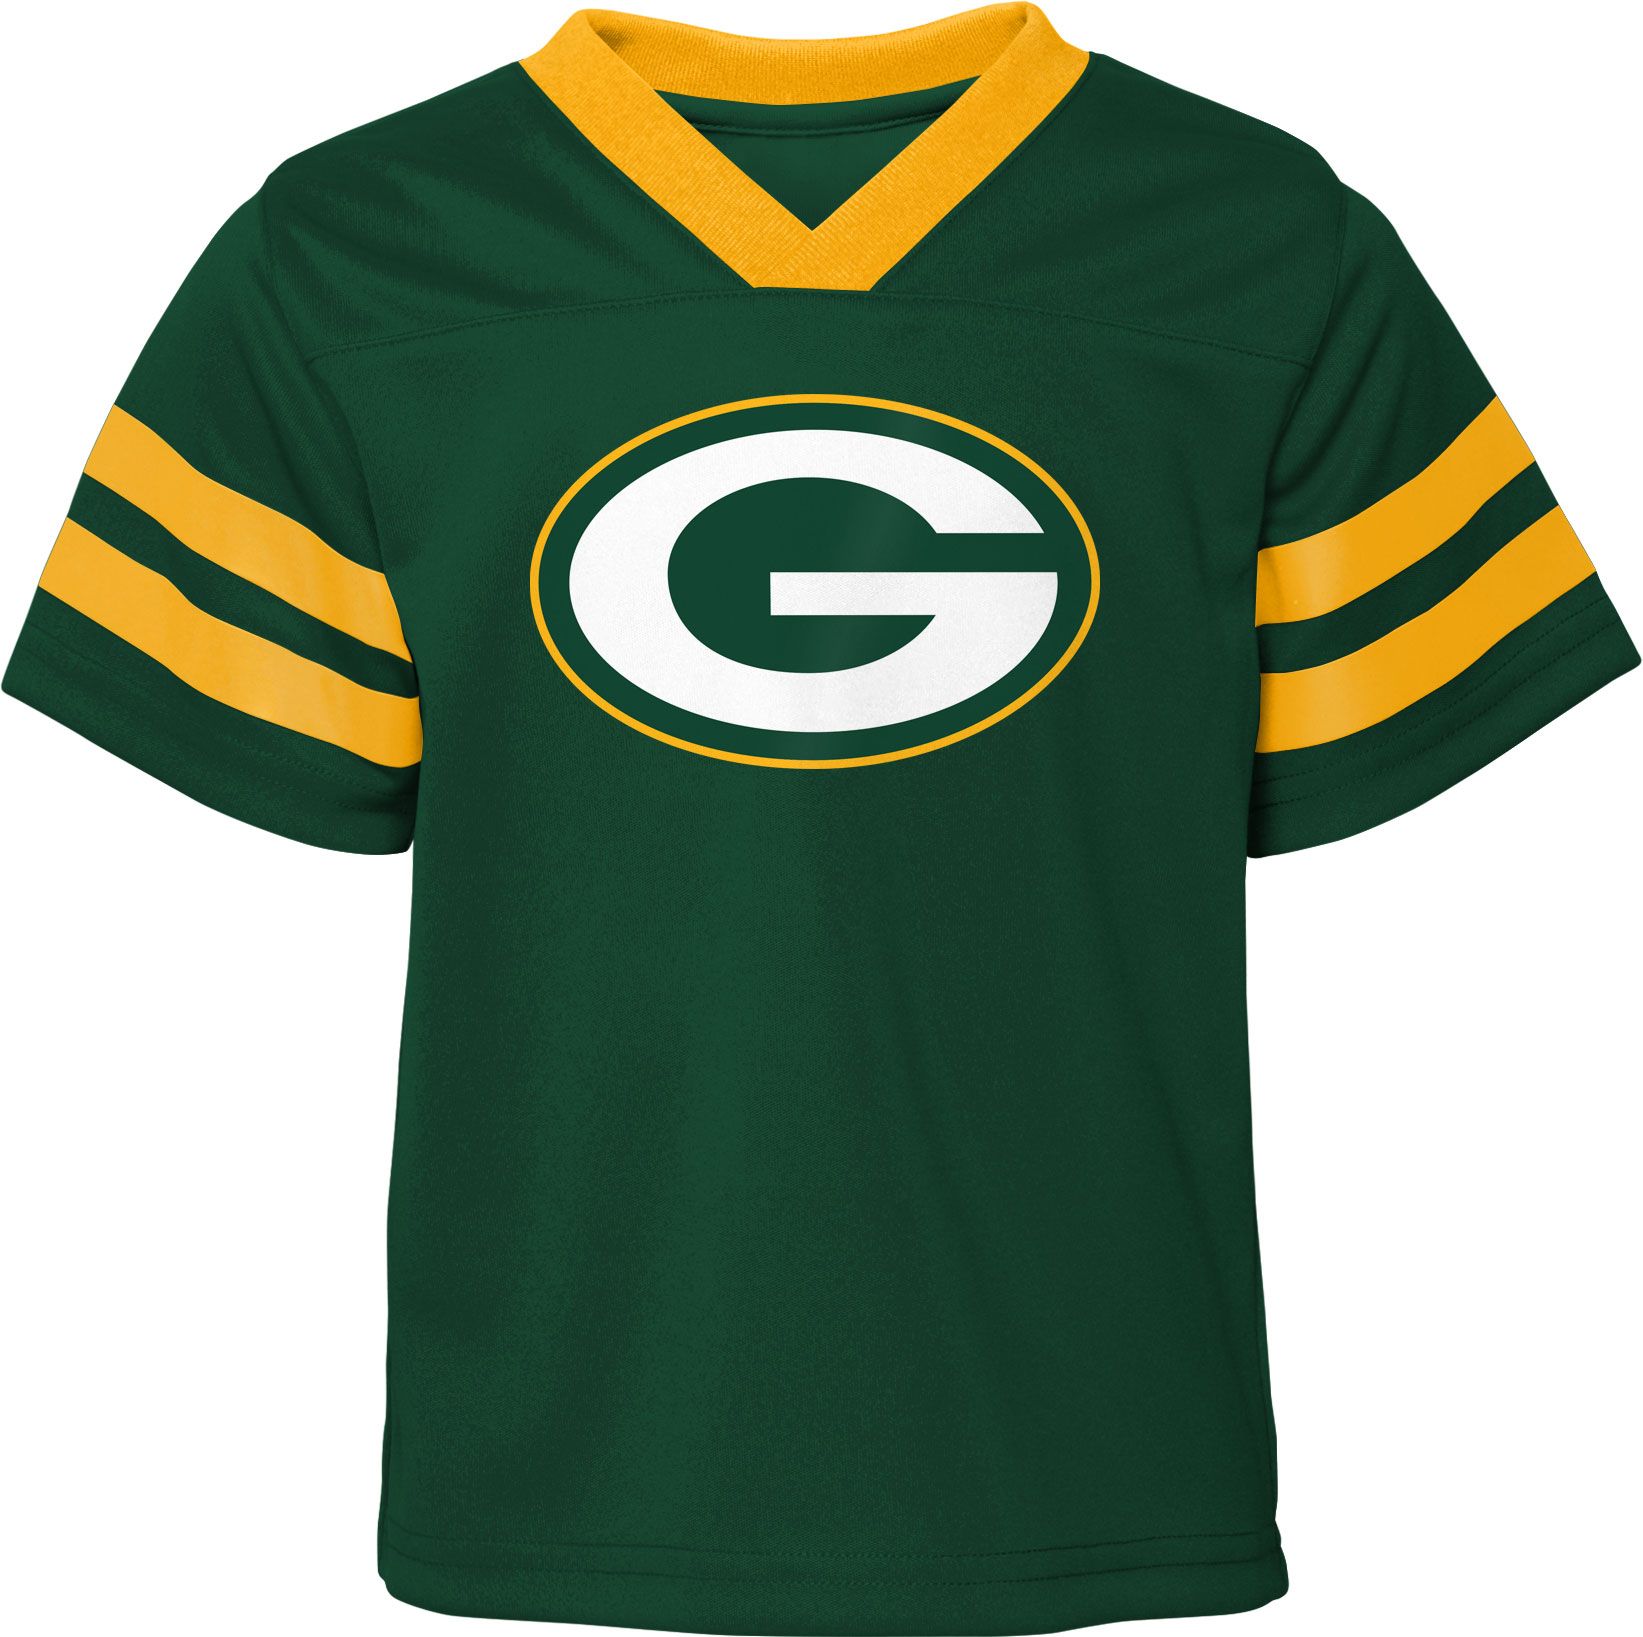 Green Bay Packers infant jersey